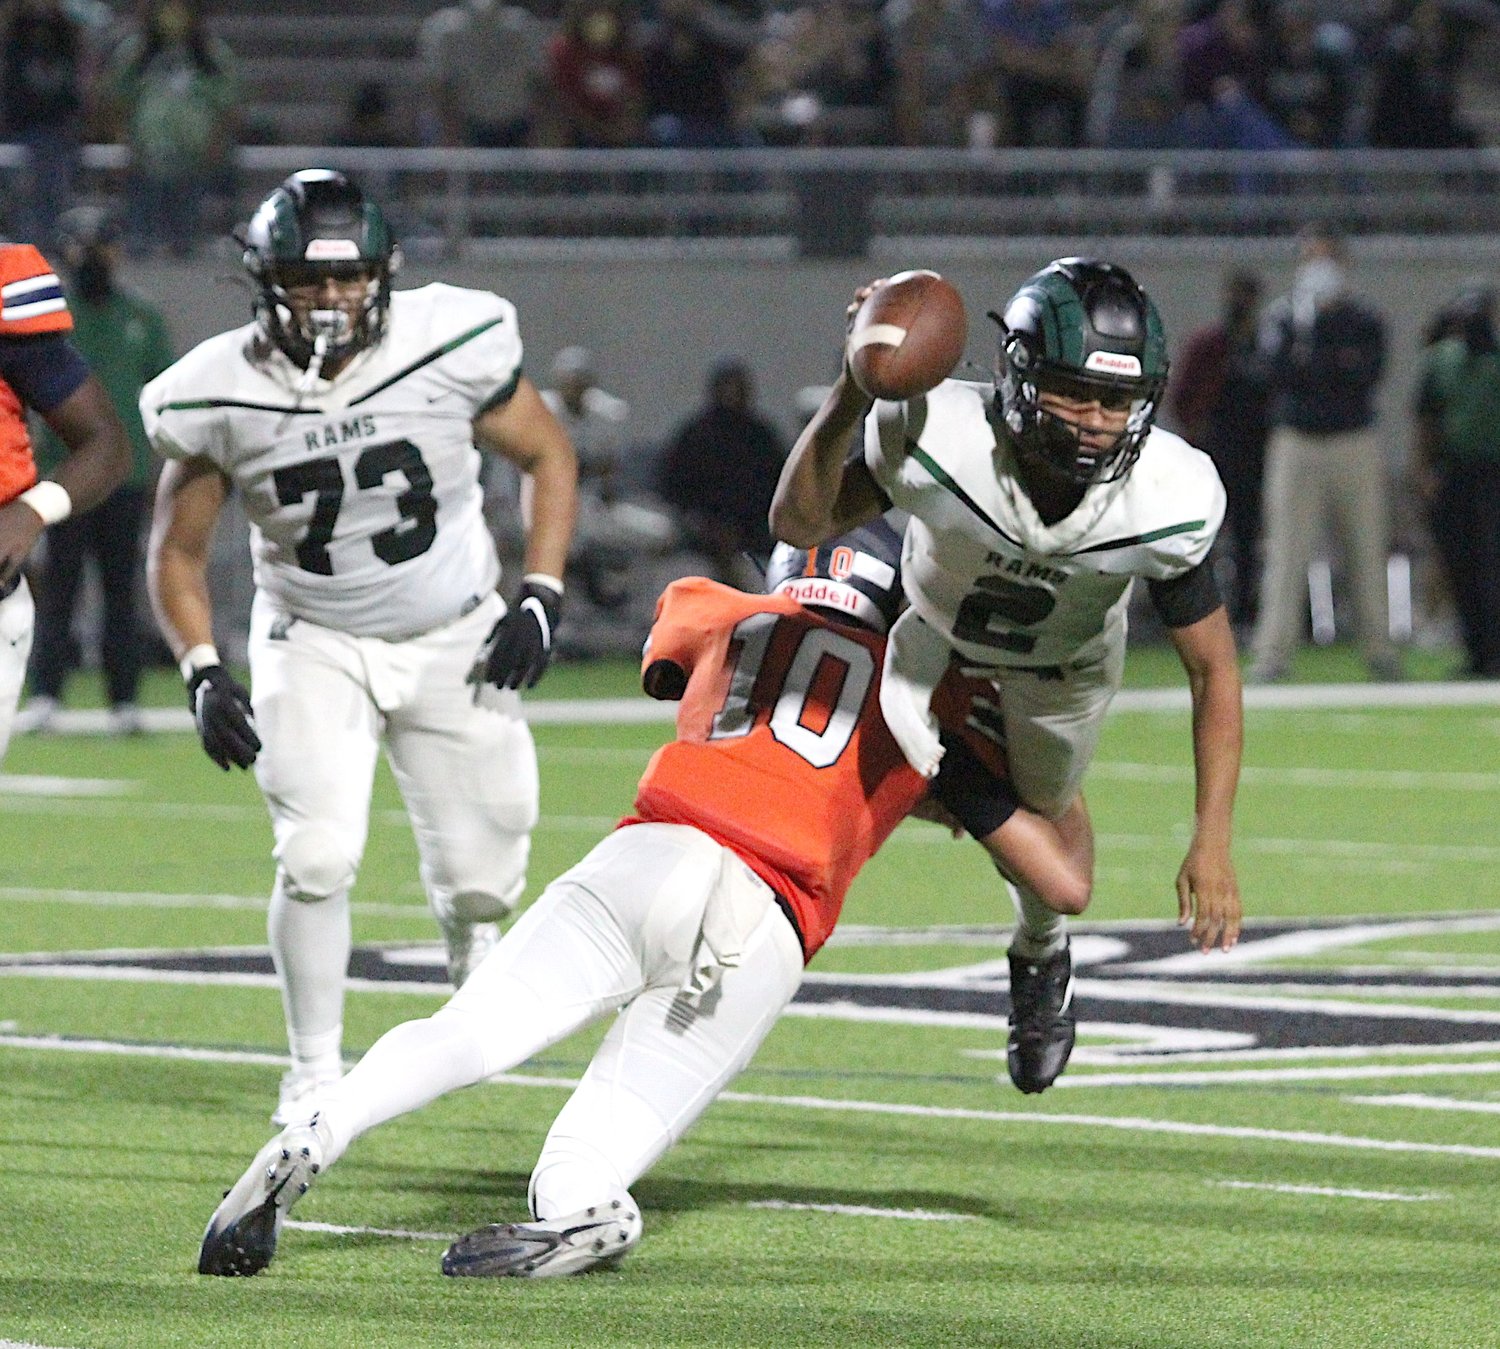 Seven Lakes' Scott Stanford (10) upends Mayde Creek quarterback Jace Wilson during the Spartans' win over Mayde Creek on Nov. 13 at Legacy Stadium.